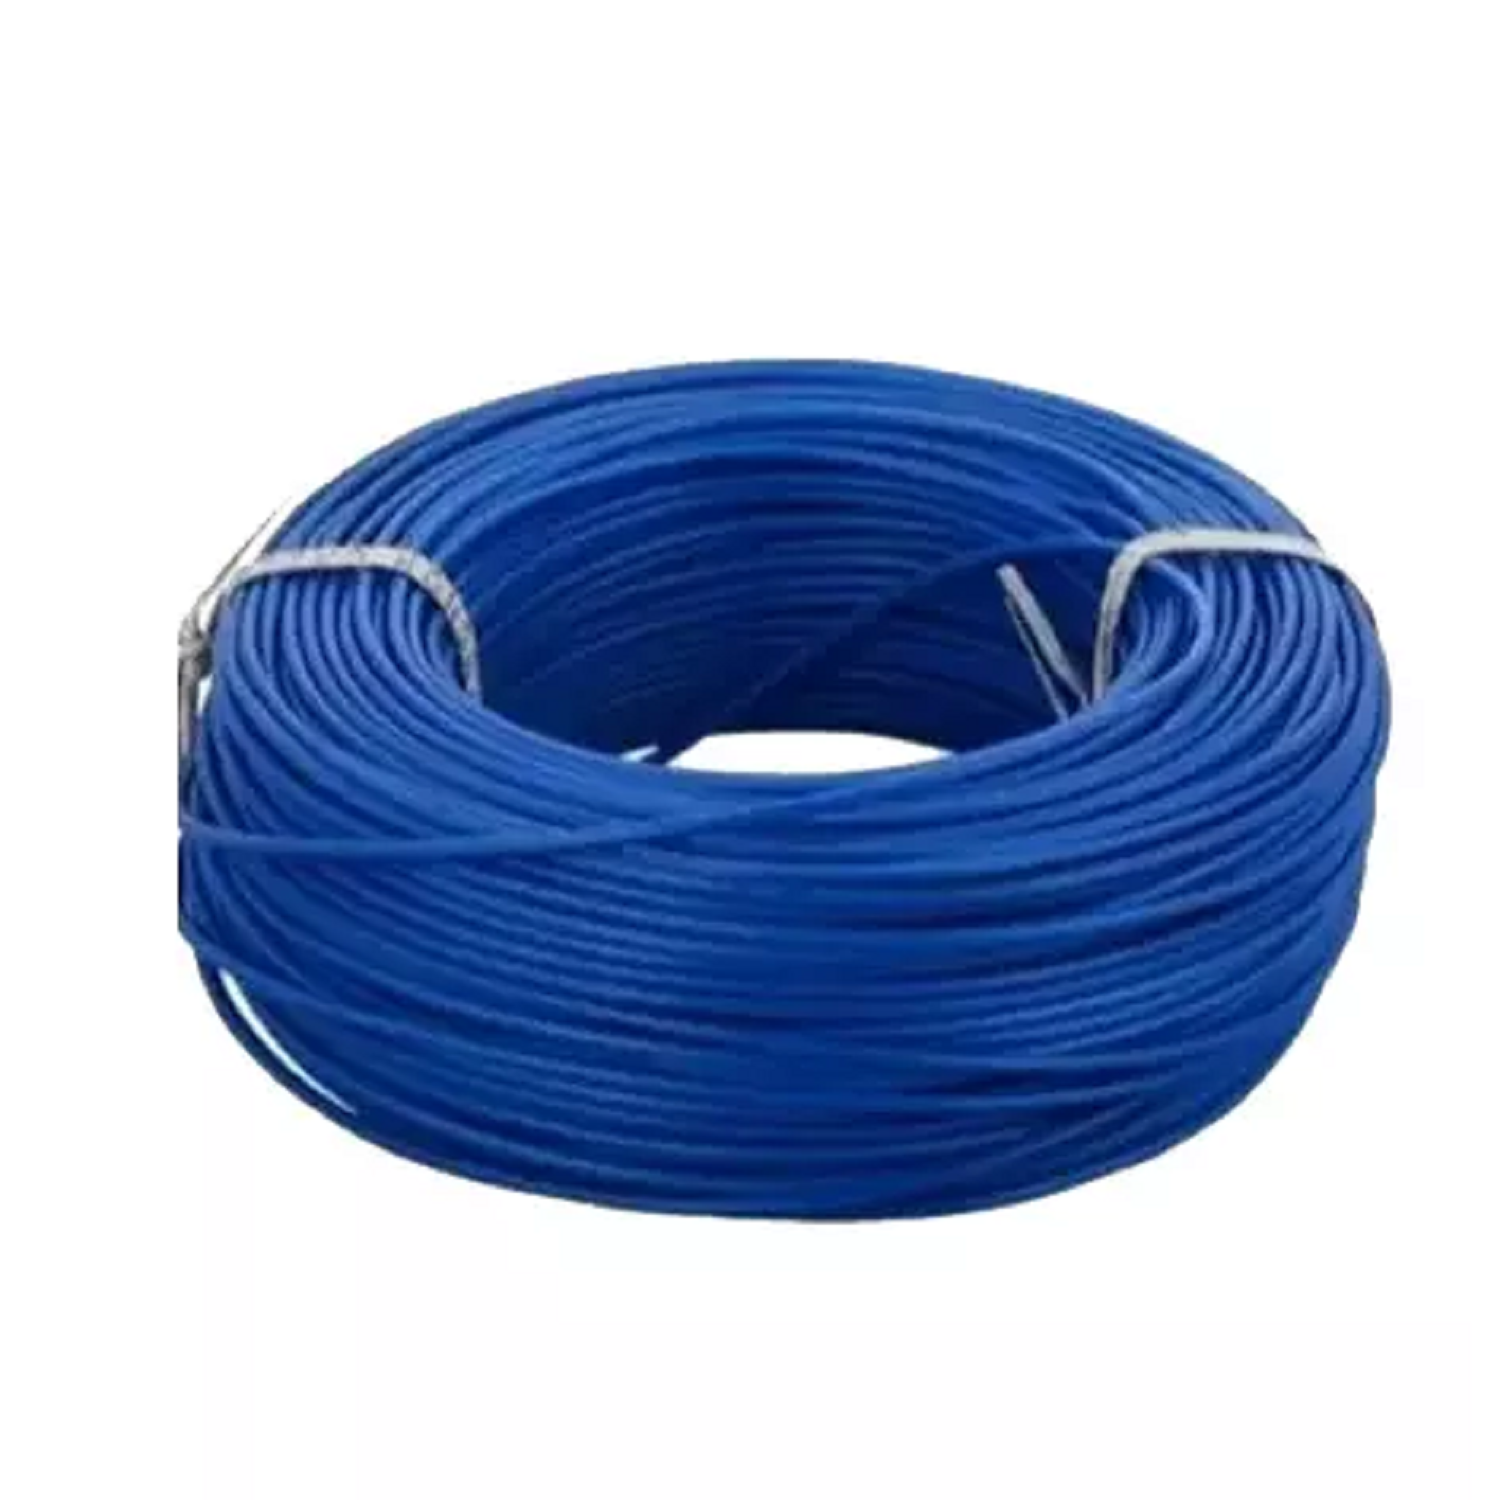 2.5 Sqmm KEI FR Single Core Copper Wire (180 Mtr) With PVC Insulated for Domestic 38 Industrial Uses